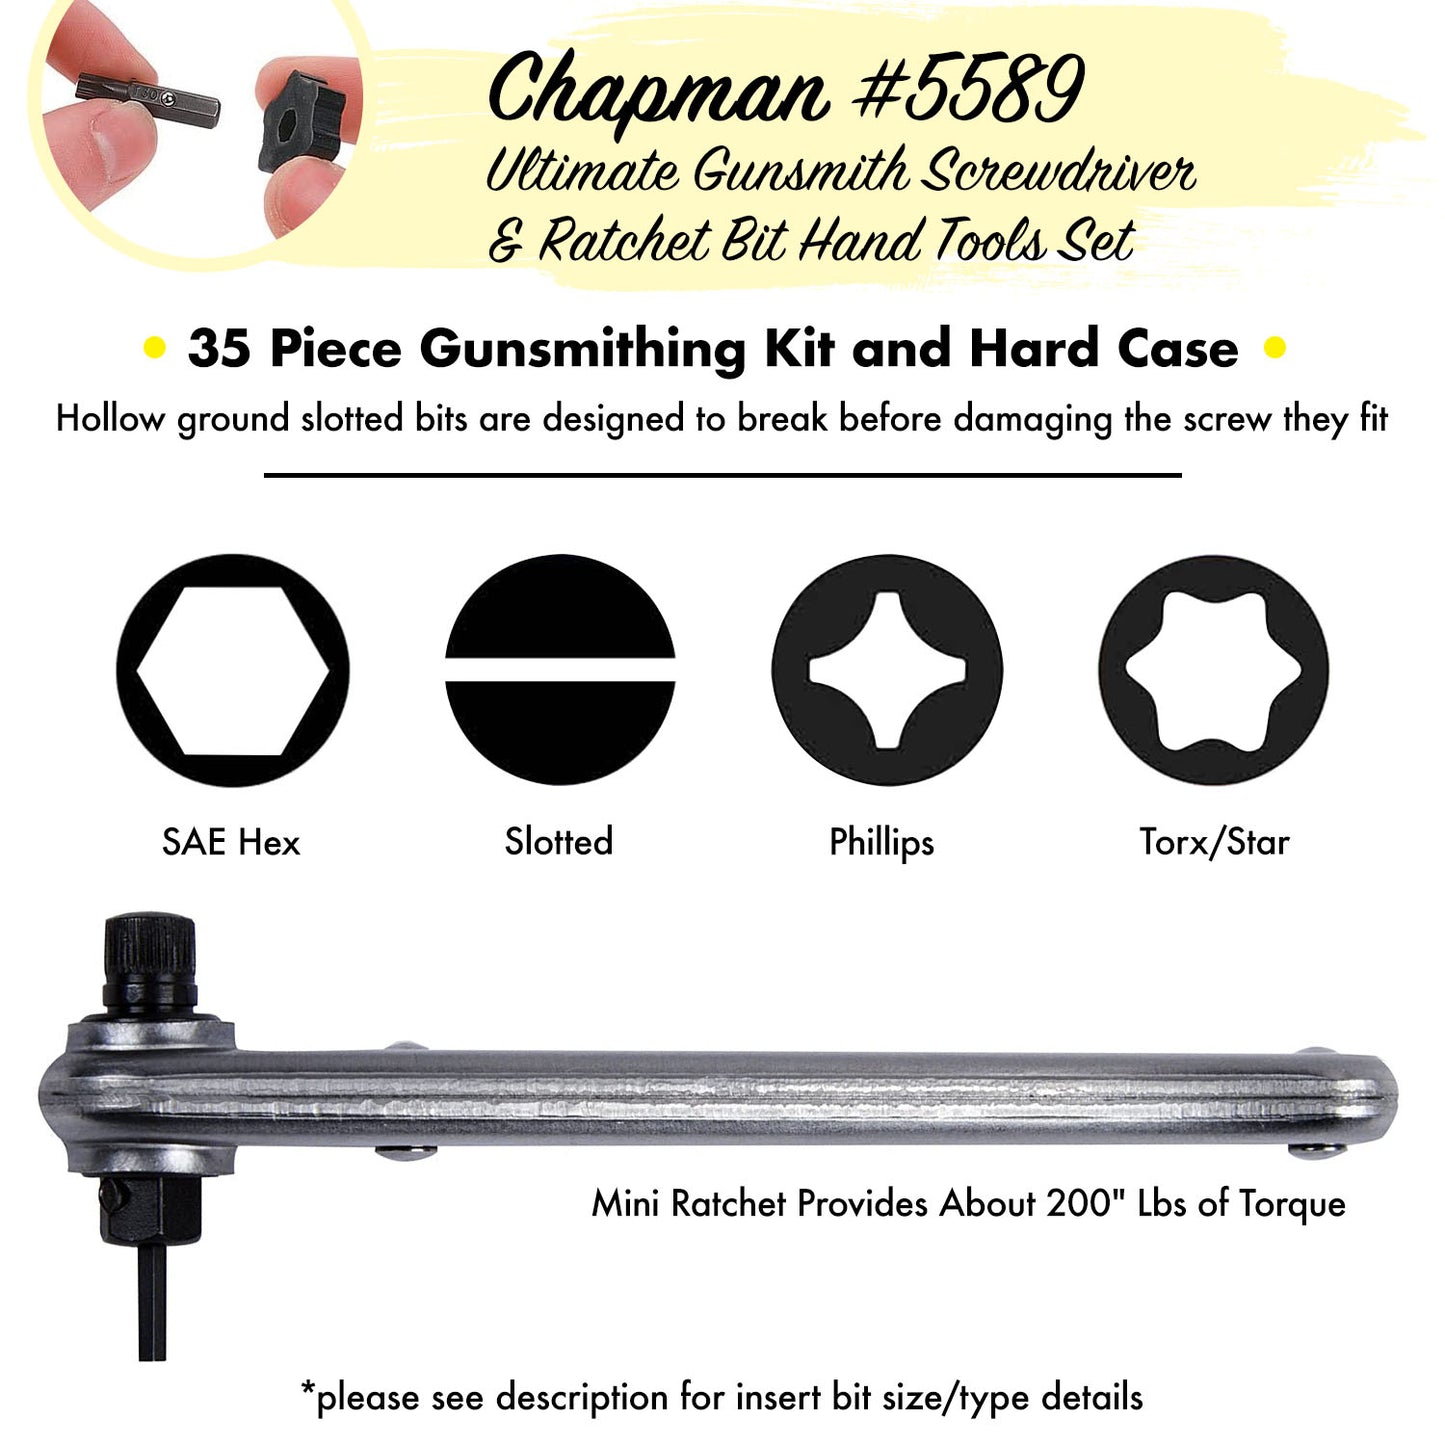 5589 Ultimate Gunsmith Slotted + Star/Torx Screwdriver Set - Now with the #1911 Grip Screw Bit & Star bits that fit Torx screws -Spinner Top included in set is great for tight spaces or starting screws  | Chapman MFG